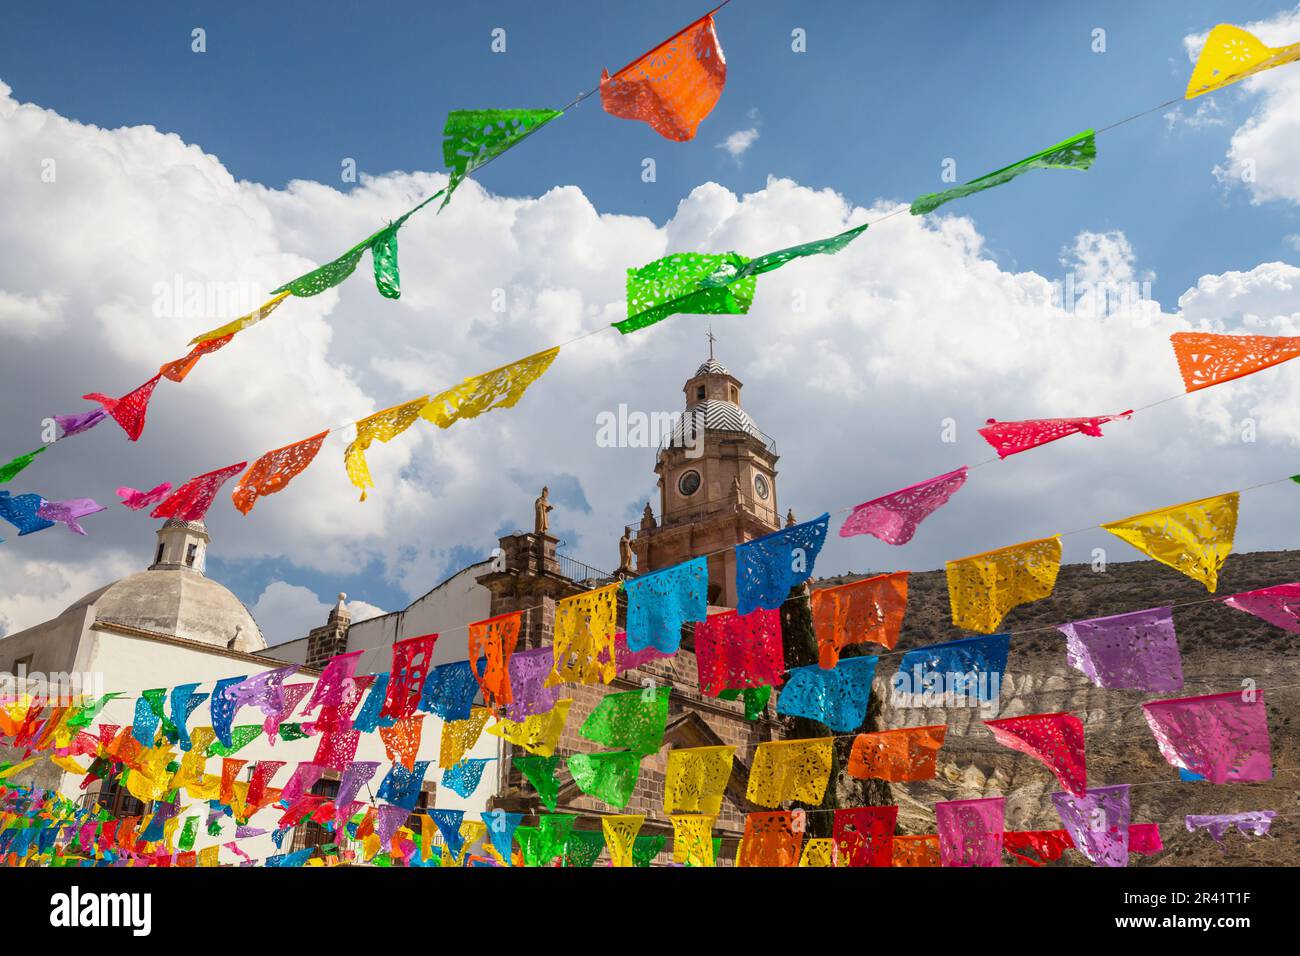 Colonial architecture in Mexico Stock Photo